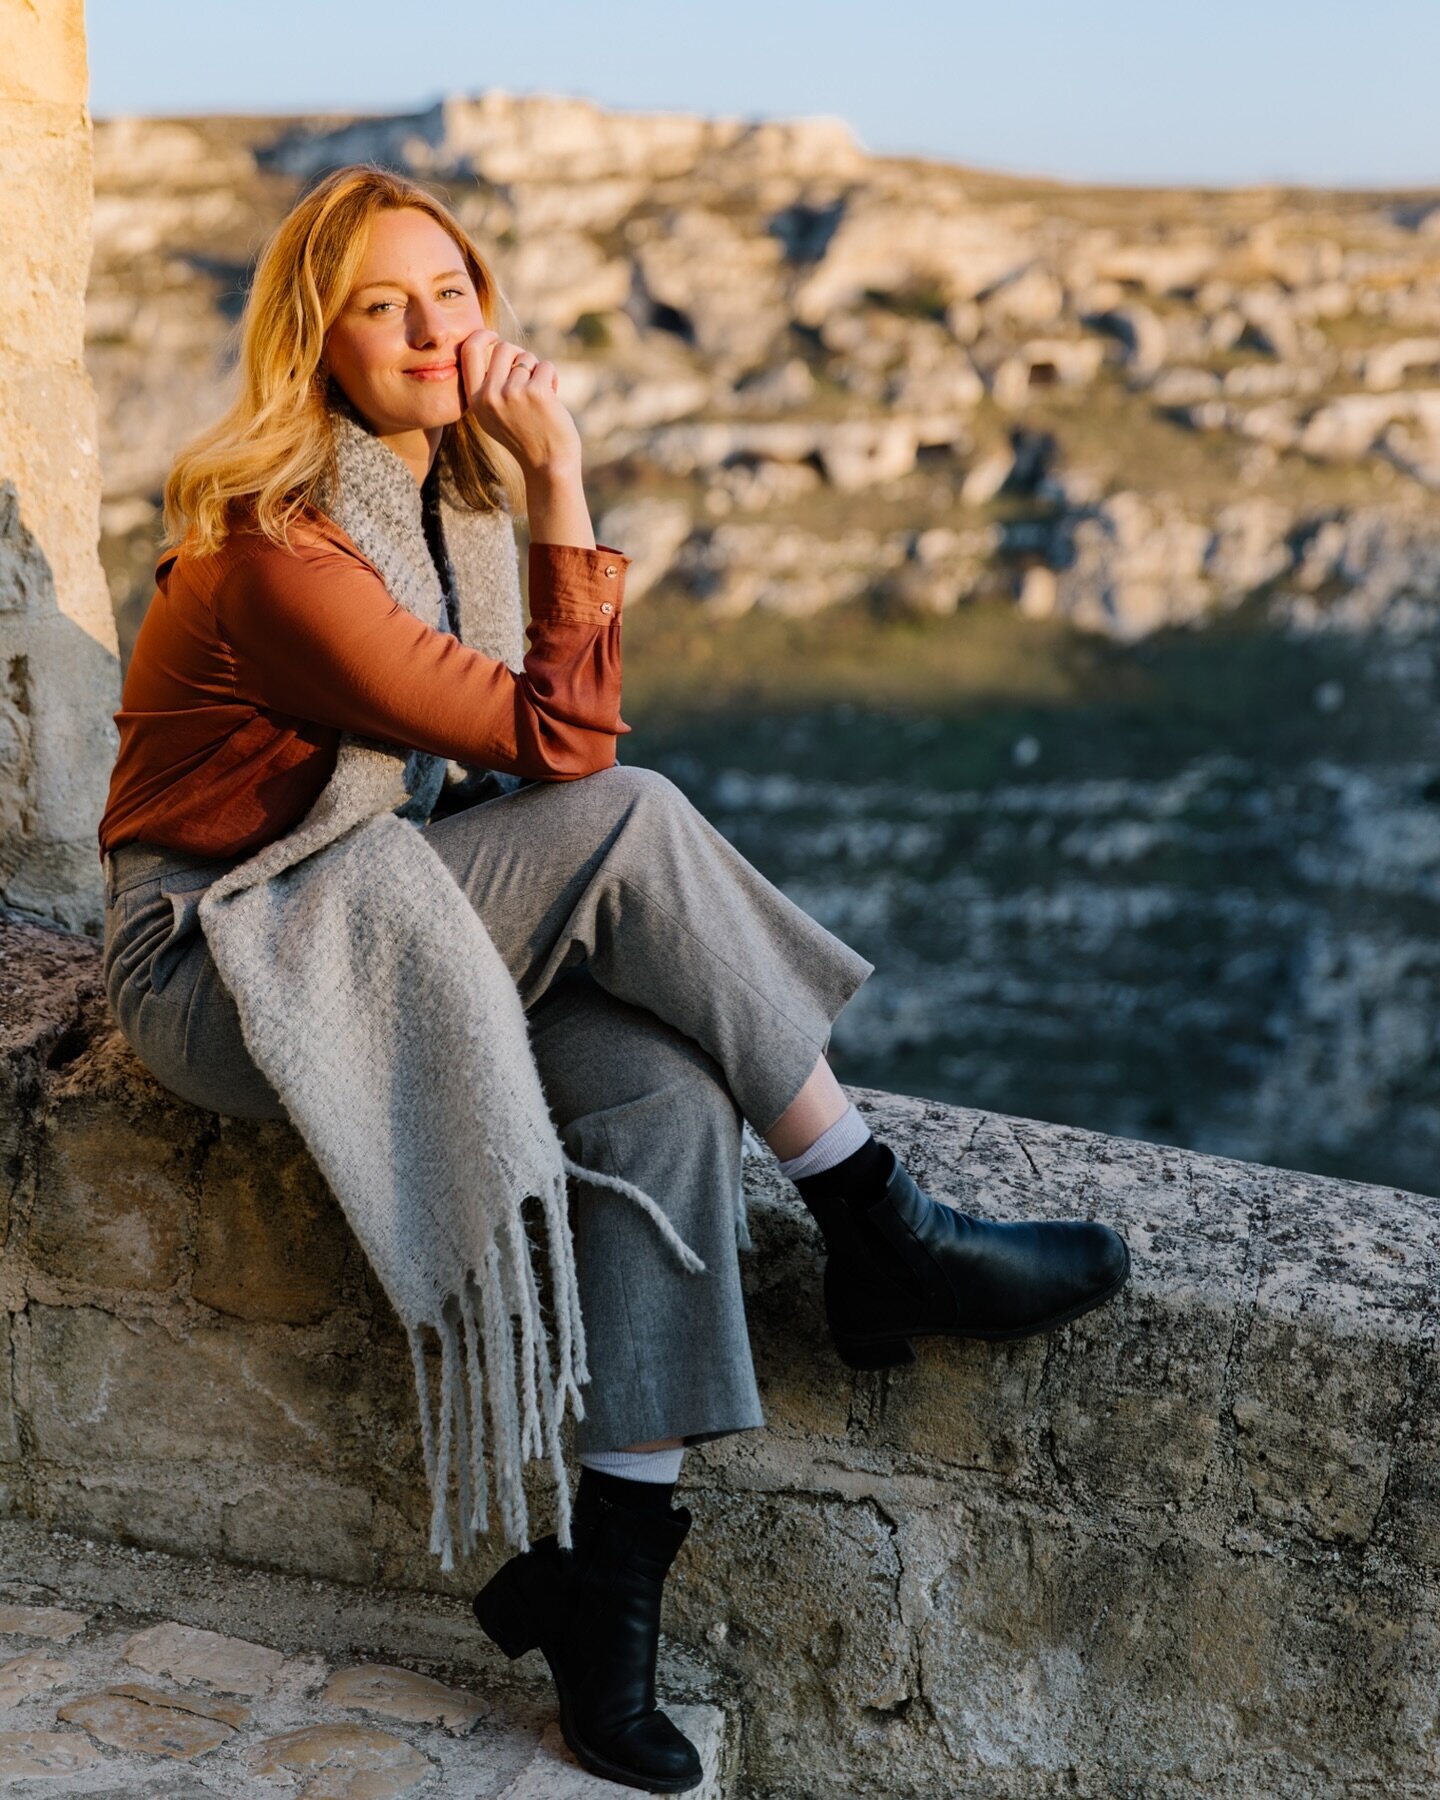 A sunrise shoot with the fashionable @heatherwallphoto in Matera, Italy.